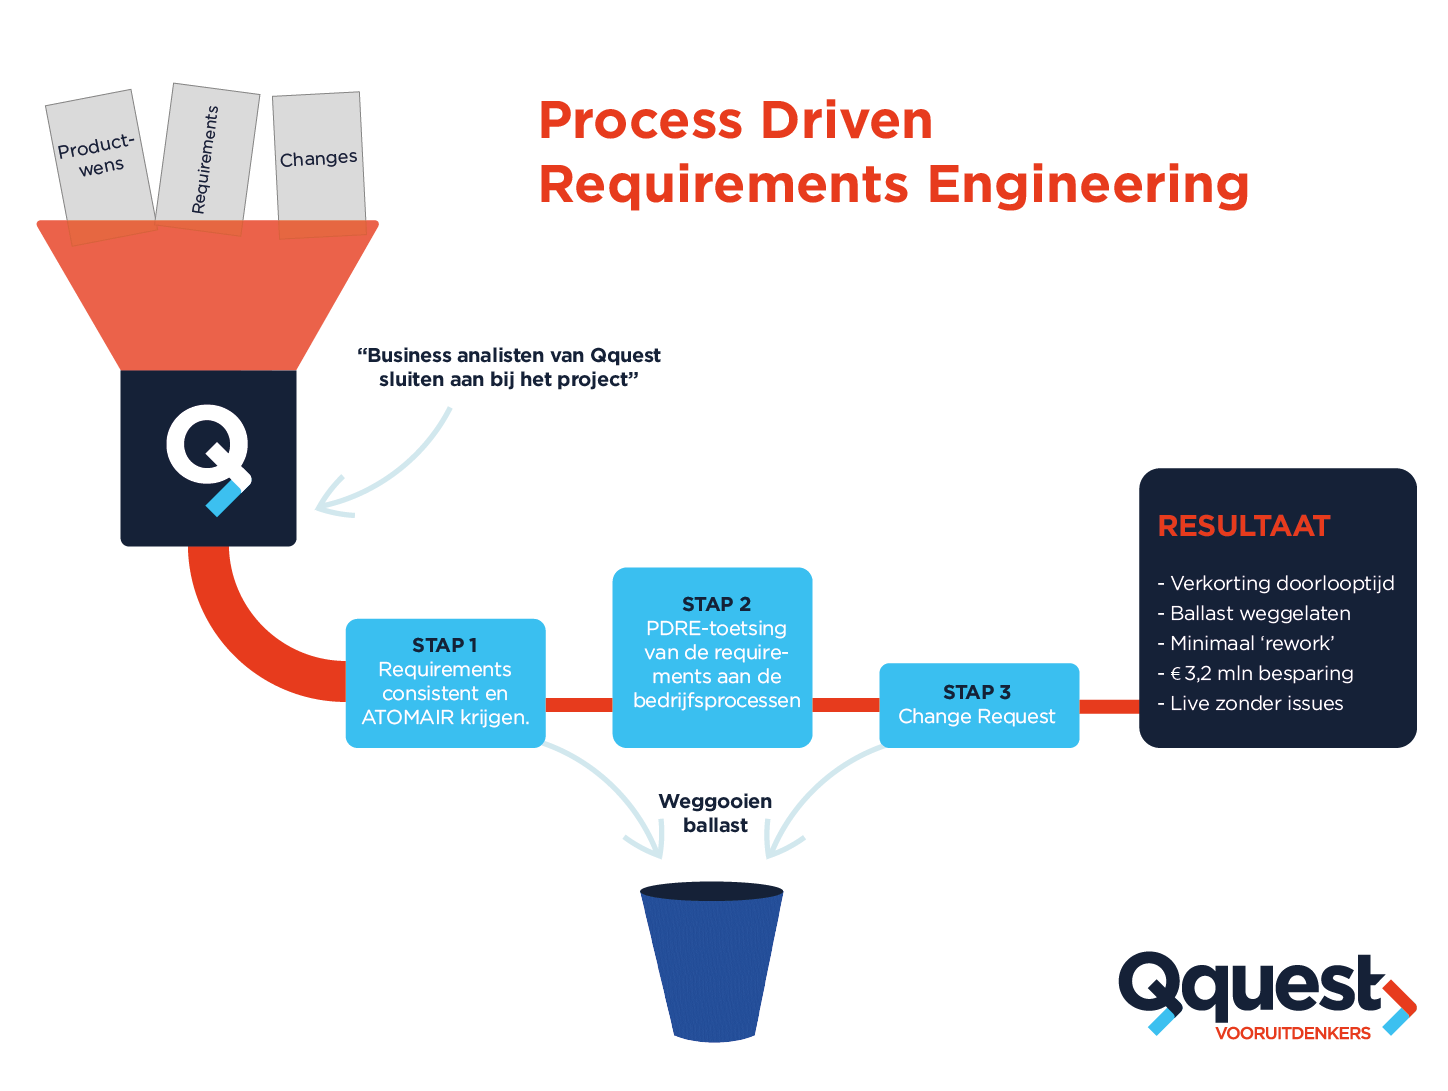 Process Driven Requirements Engineering_Qquest